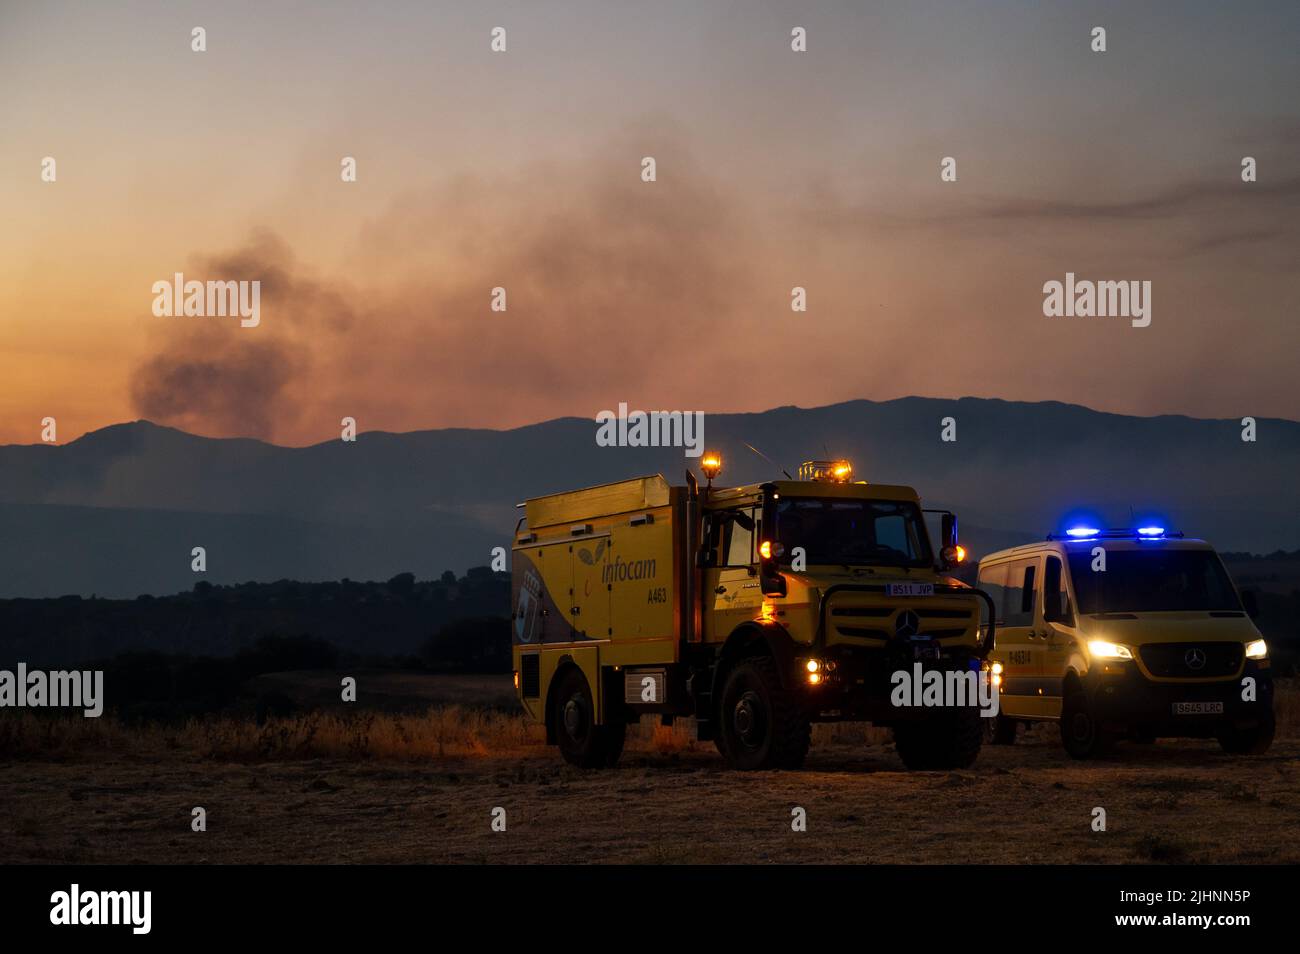 Guadalajara, Spain. 19th July, 2022. Firefighter vehicles are seen near Valdepeñas de la Sierra, where a fire has forced to evacuate nearly 70 residents from the area. Wildfires have broken out across Spain amid a severe heatwave. Credit: Marcos del Mazo/Alamy Live News Stock Photo